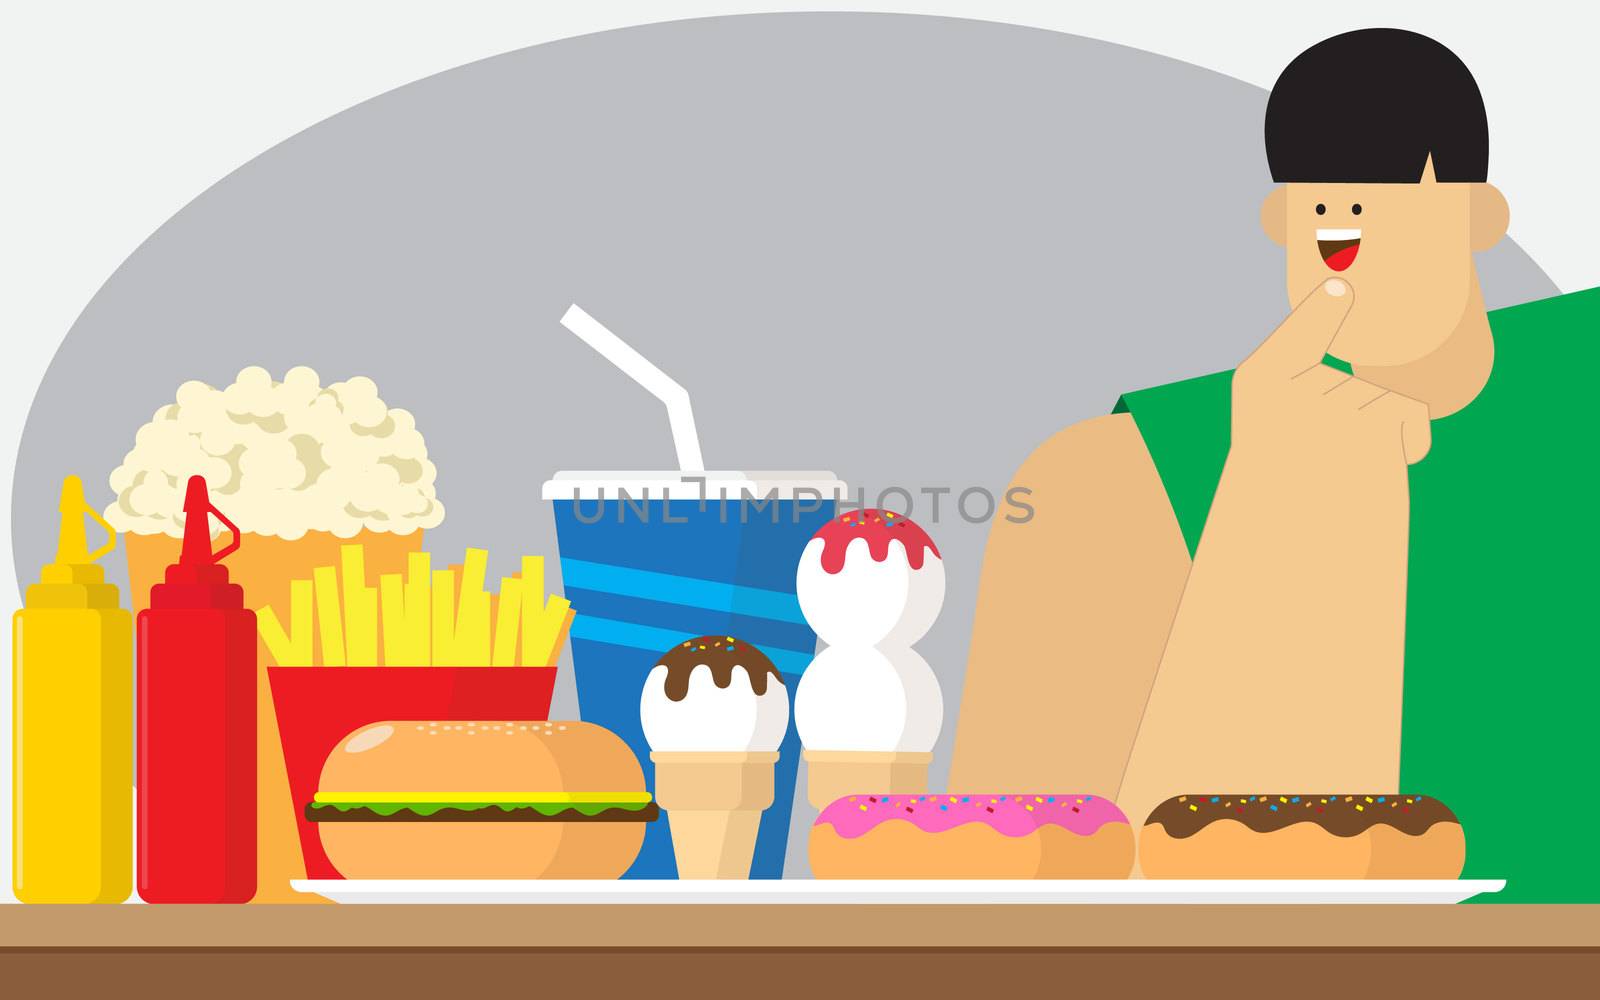 A collection of colorful snack fastfood sweets, in which the young man is choosing which piece to eat first.